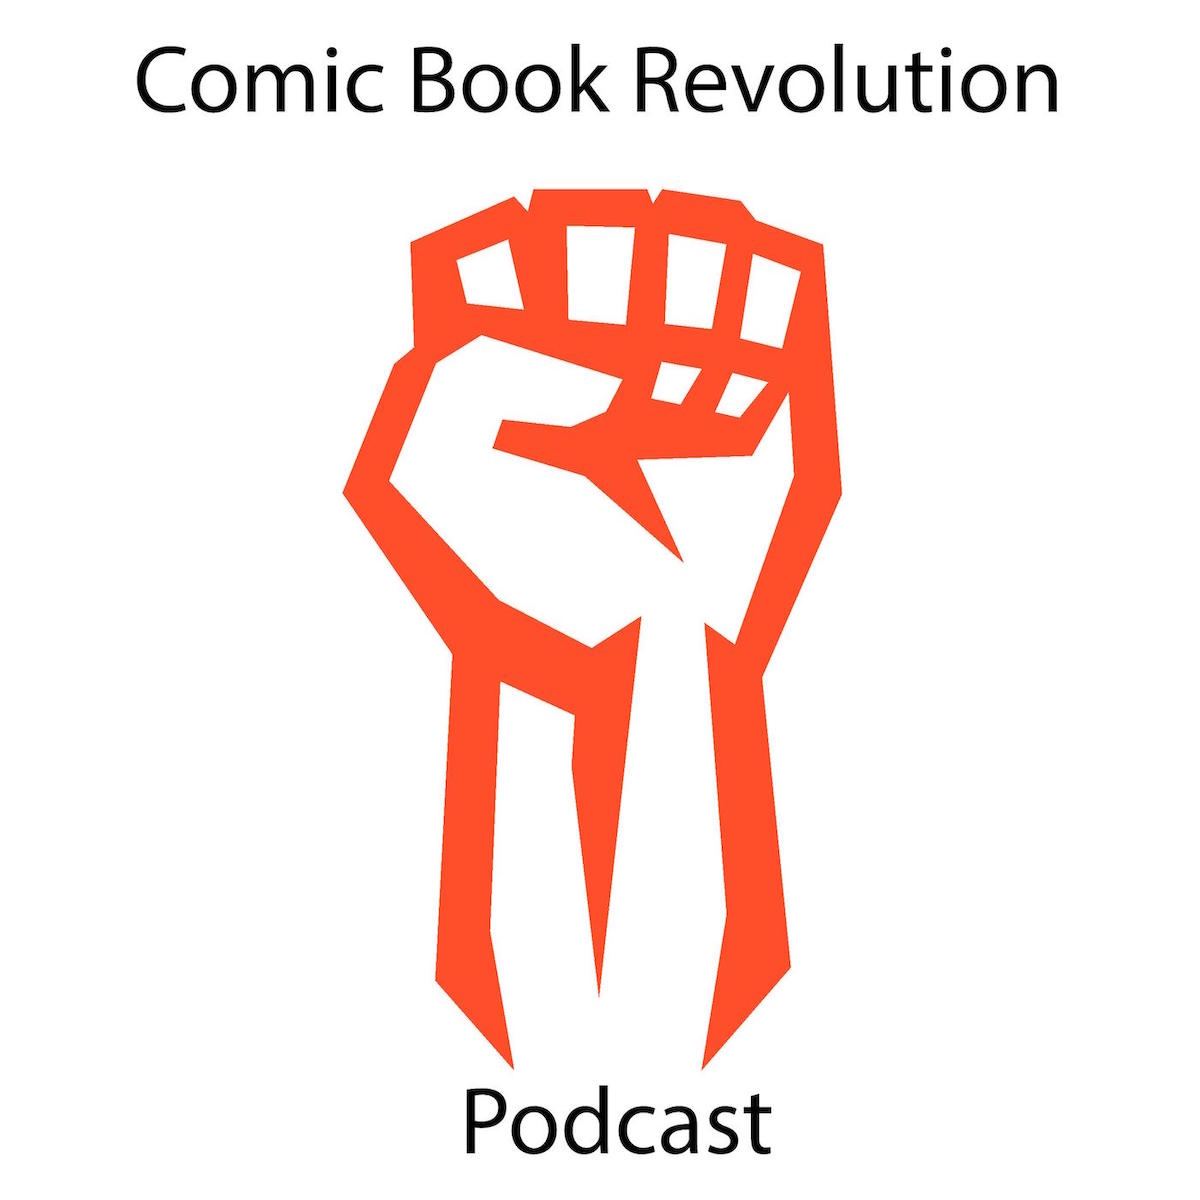 Episode 83 - Part 2 - Substack Takes Over Comics!